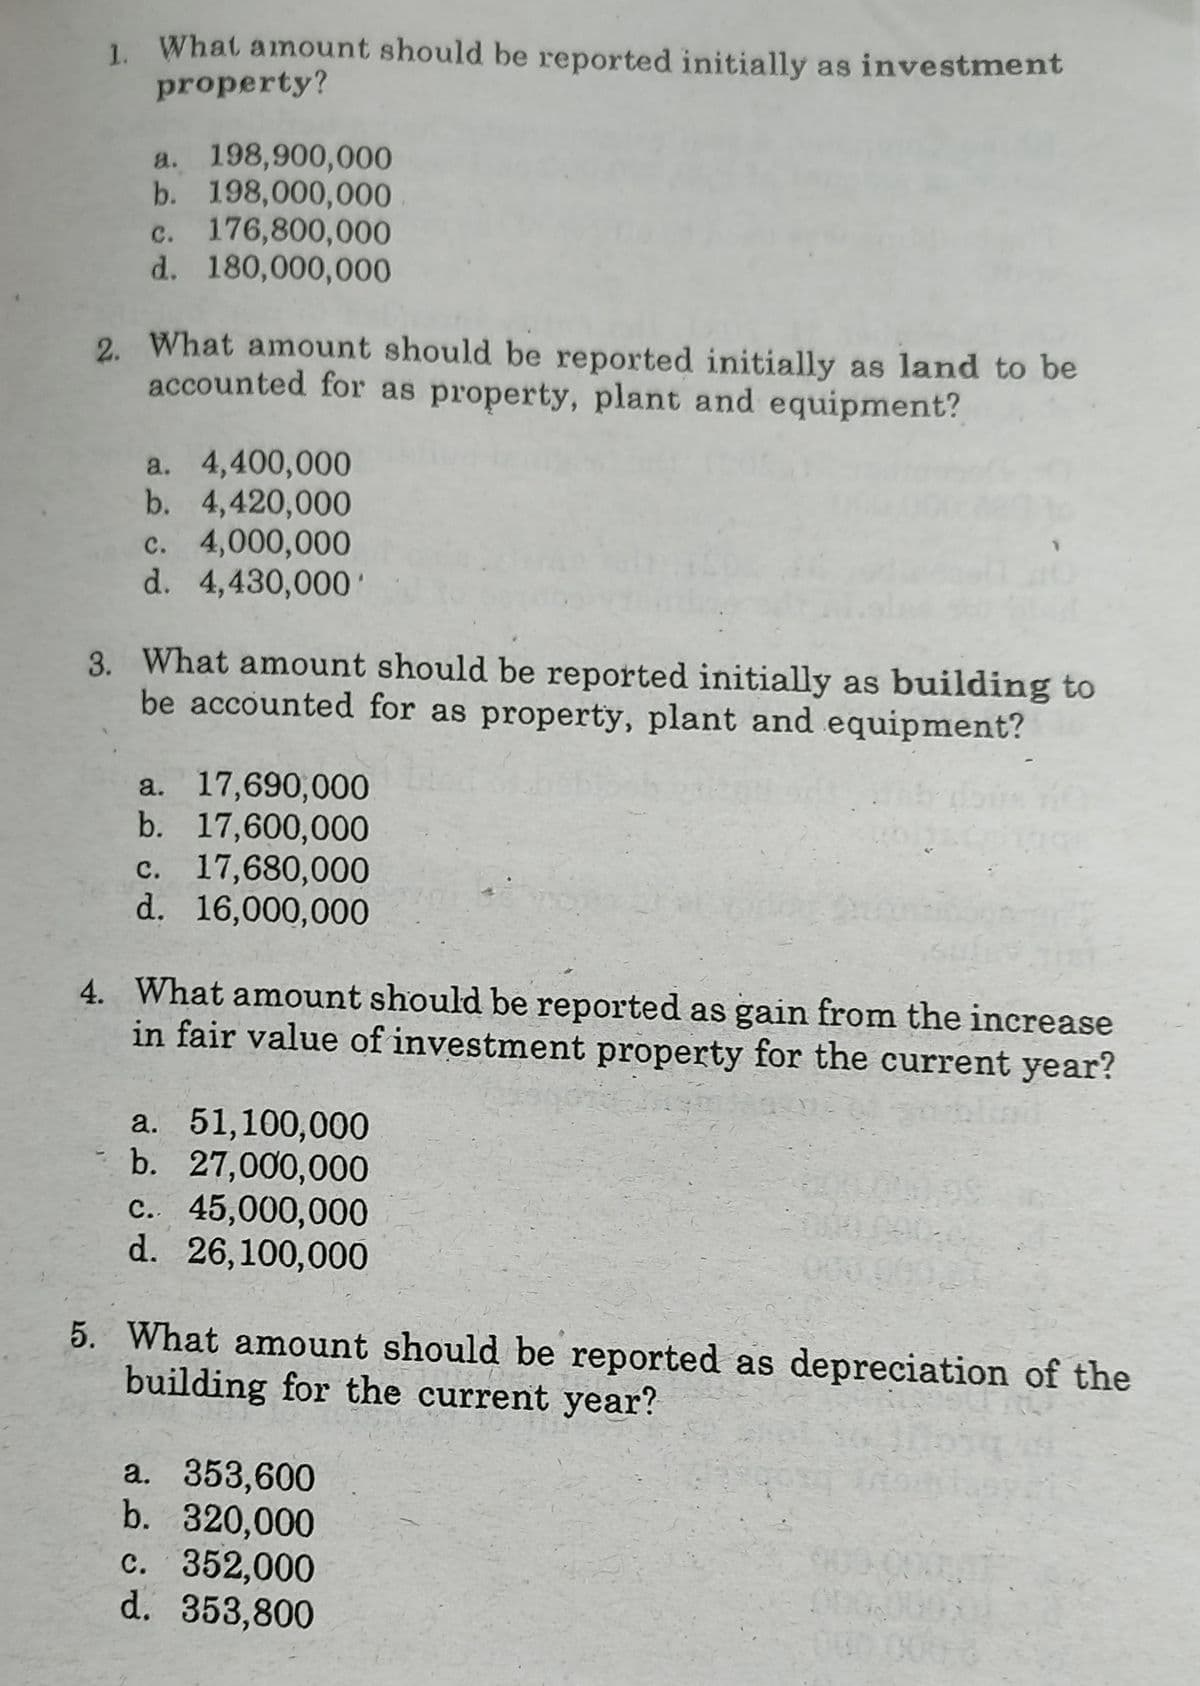 1. What amount should be reported initially as investment
property?
a. 198,900,000
b. 198,000,000
c. 176,800,000
d. 180,000,000
2. What amount should be reported initially as land to be
accounted for as property, plant and equipment?
a. 4,400,000
b. 4,420,000
с. 4,000,000
d. 4,430,000'
3. What amount should be reported initially as building to
be accounted for as property, plant and equipment?
a. 17,690,000
b. 17,600,000
c. 17,680,000
d. 16,000,000
4. What amount should be reported as gain from the increase
in fair value of investment property for the current year?
a. 51,100,000
b. 27,000,000
c. 45,000,000
d. 26,100,000
5. What amount should be reported as depreciation of the
building for the current year?
a. 353,600
b. 320,000
c. 352,000
d. 353,800
